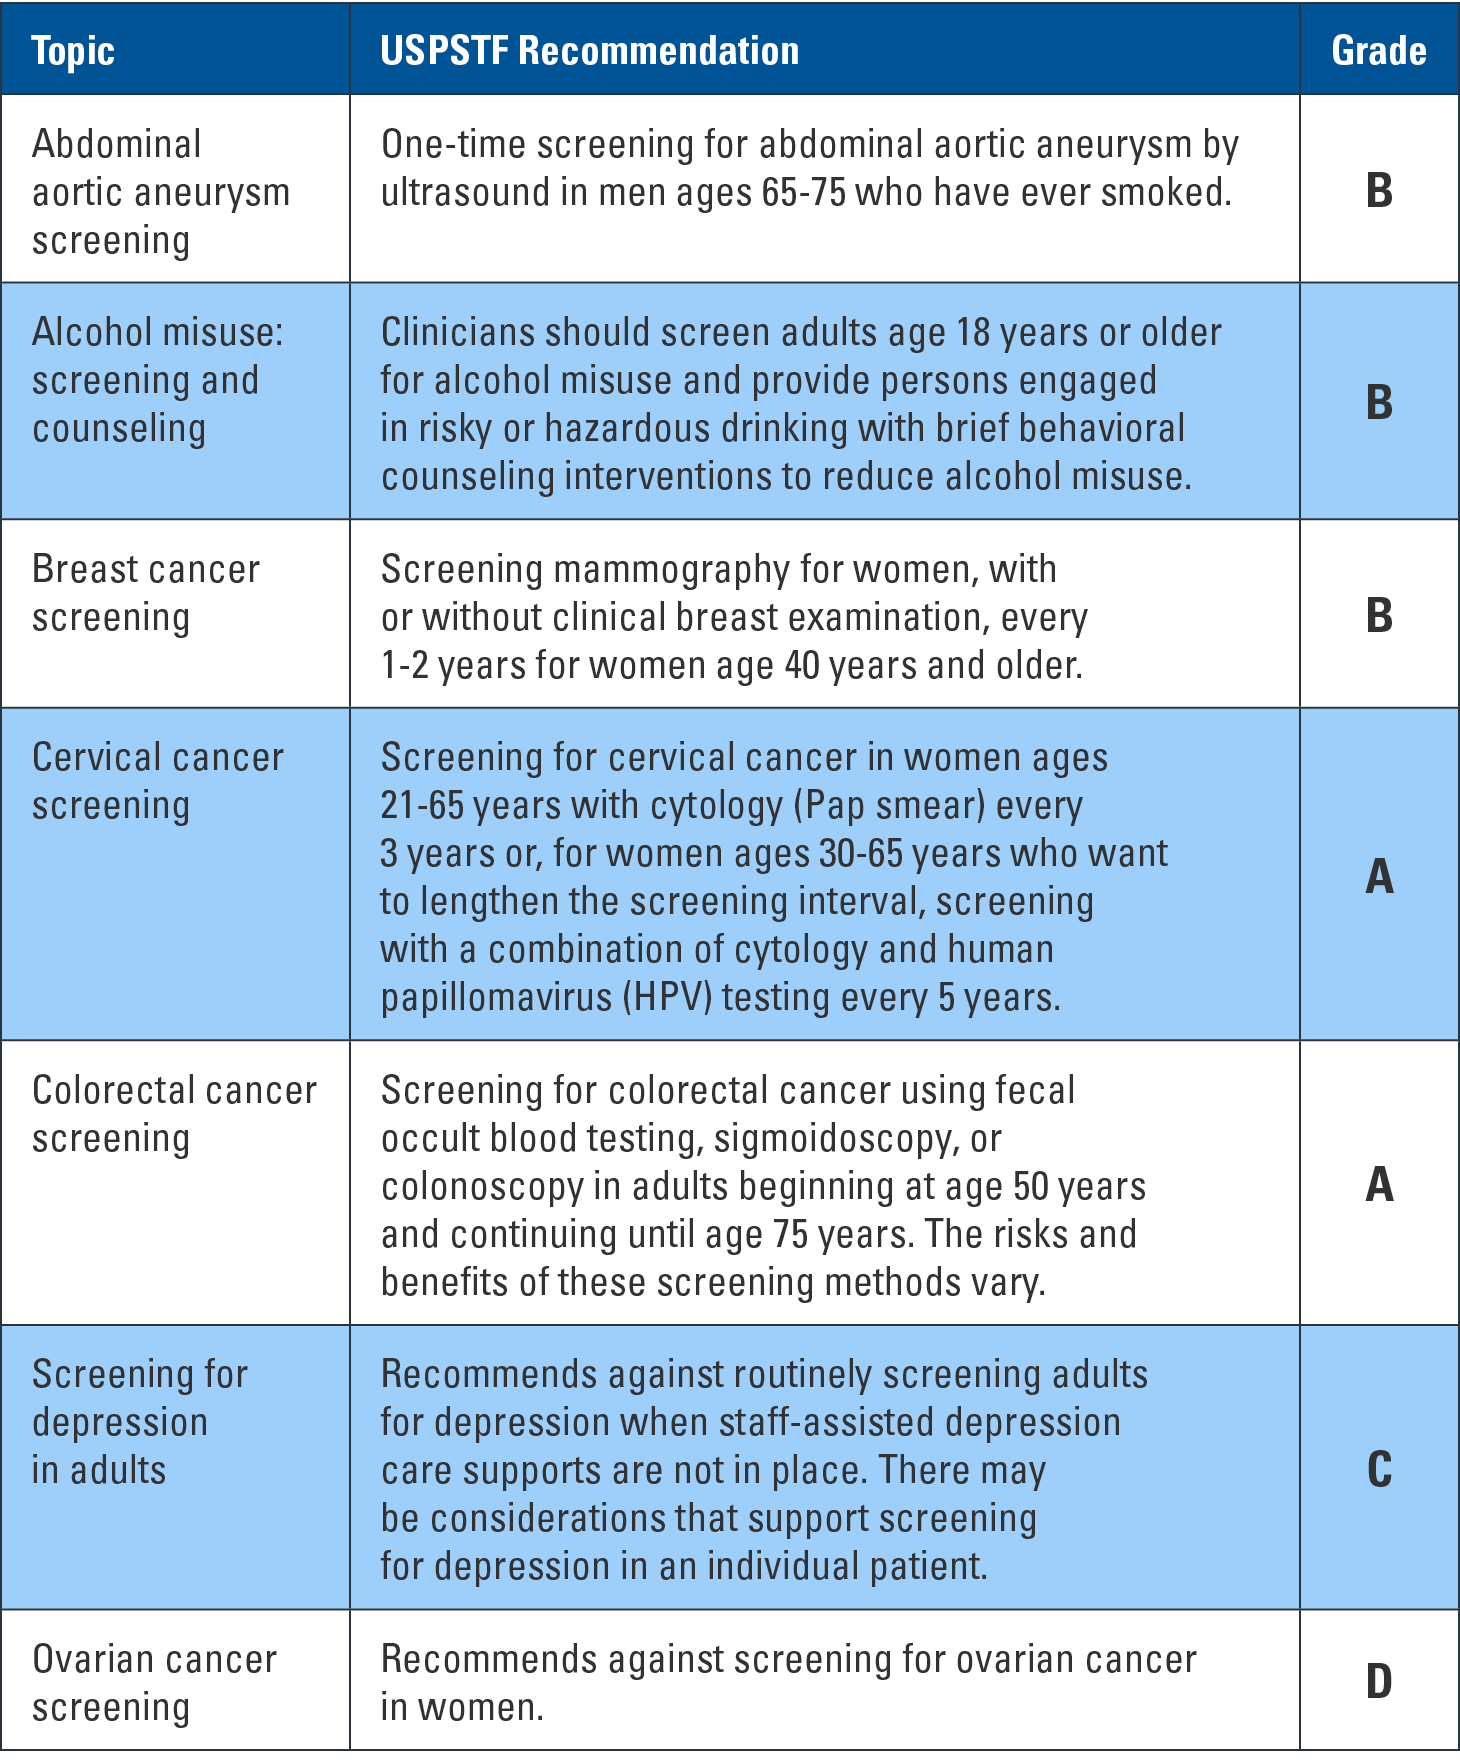 USPSTF Recommendations Health Screening Grade Table